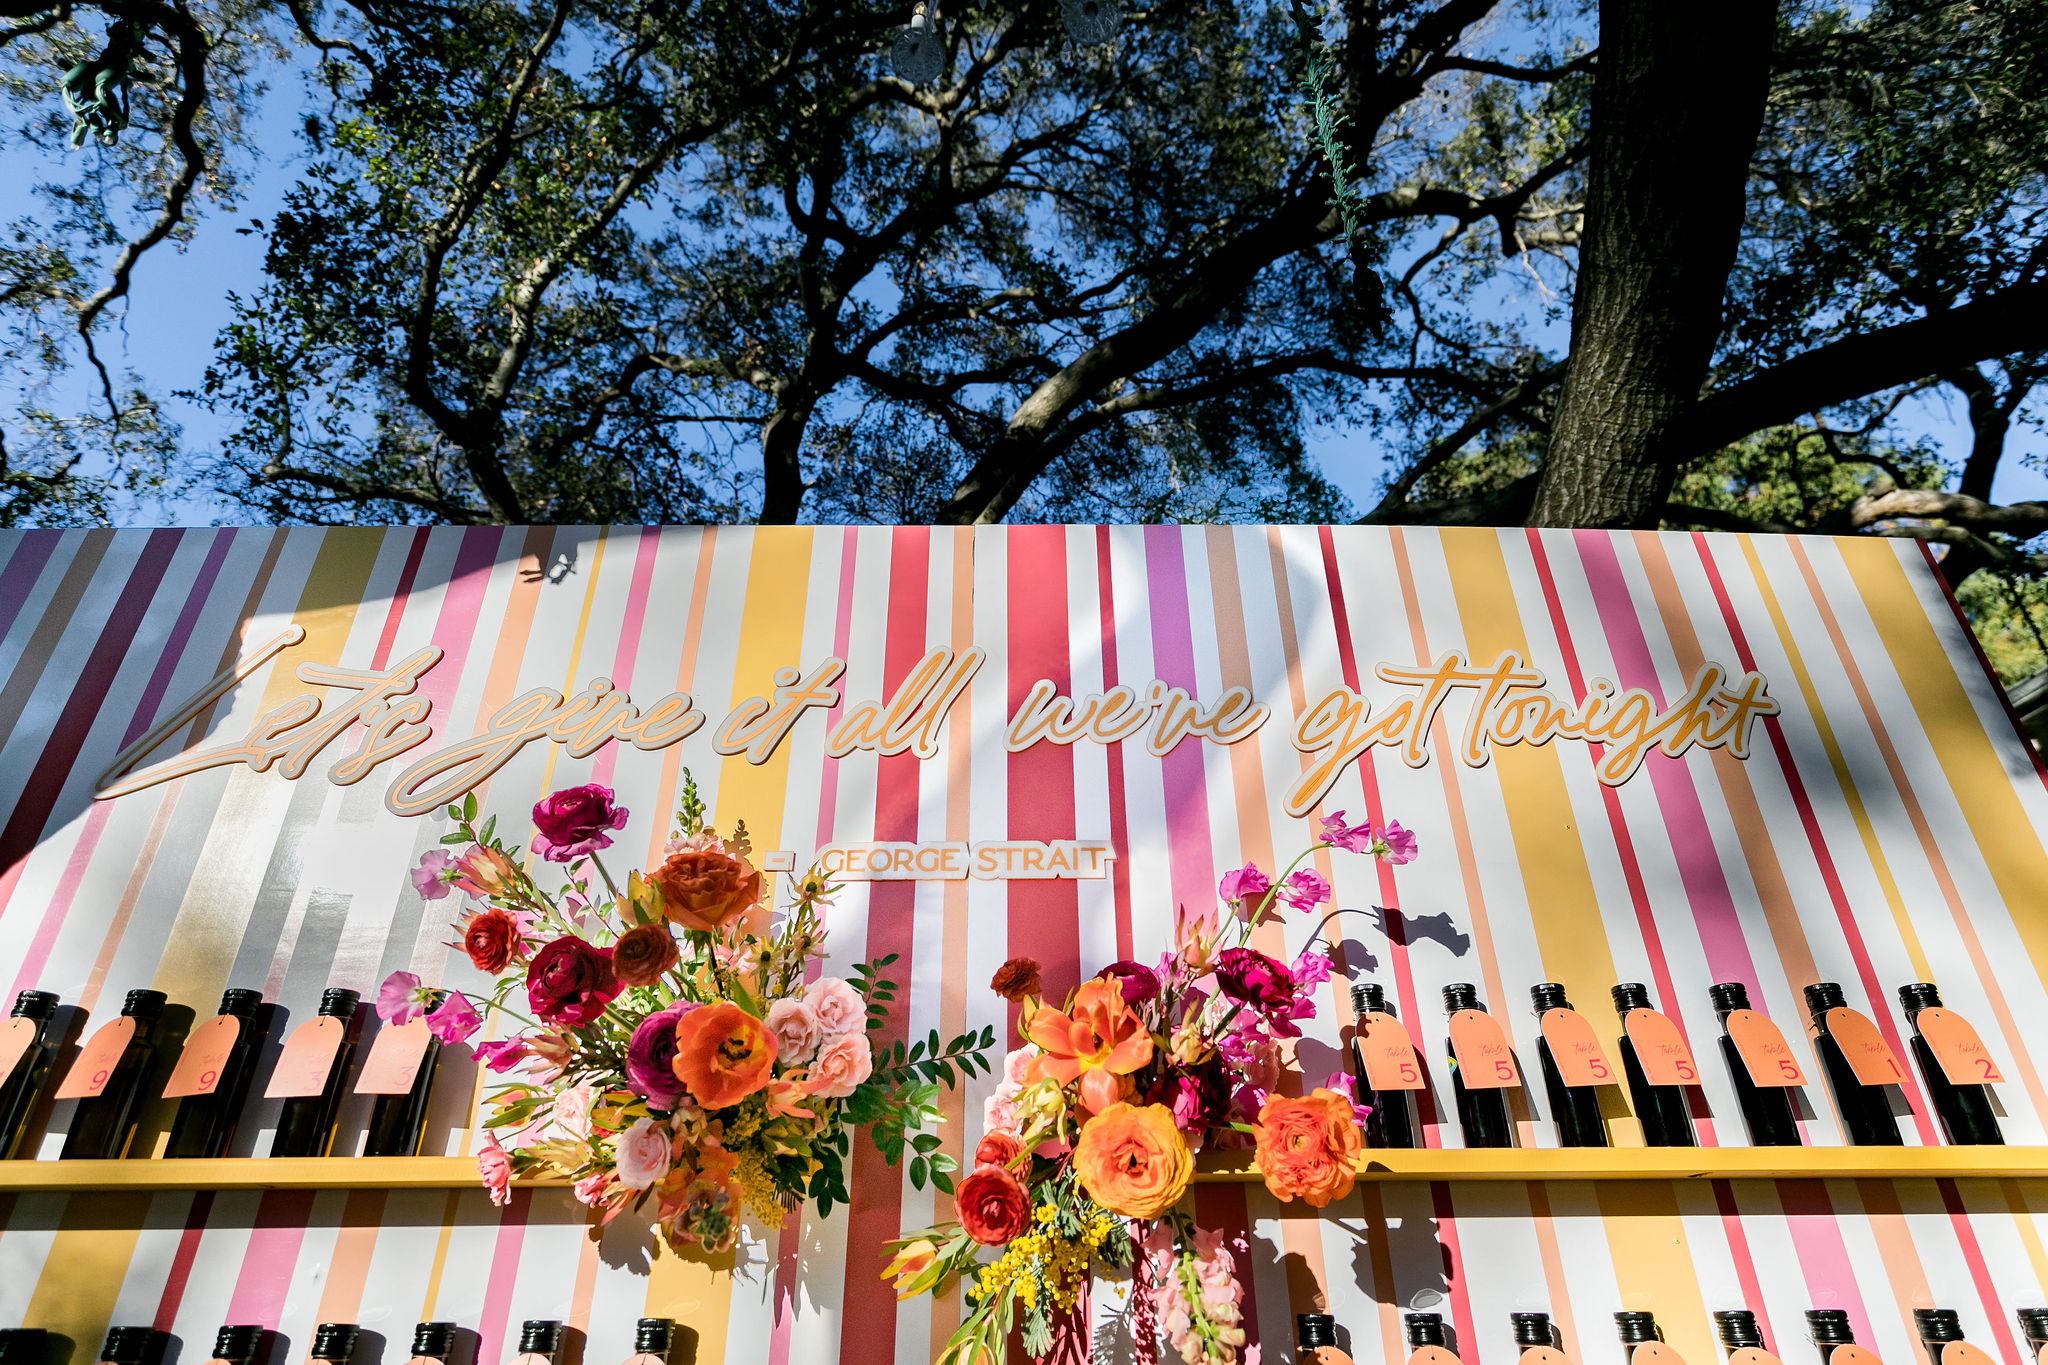 bright pink, orange, yellow and red seating chart display with country music lyrics and individual bottles of olive oil displaying table numbers